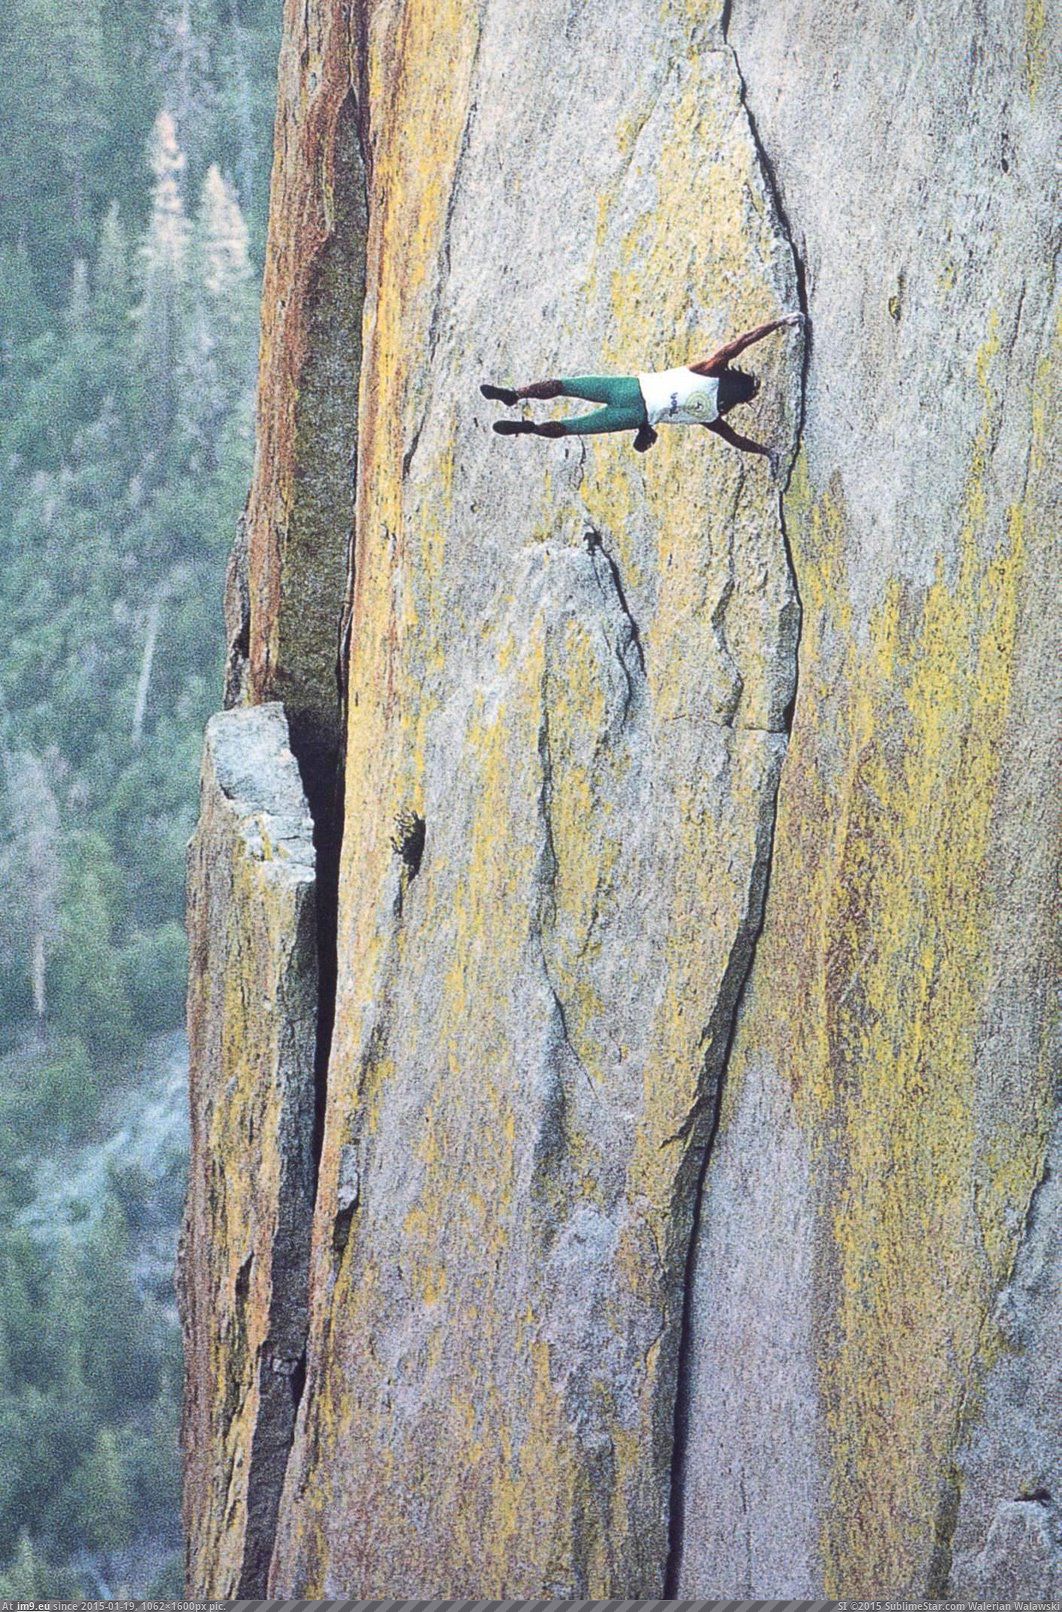 [Wtf] Free-climbers are insane. (in My r/WTF favs)